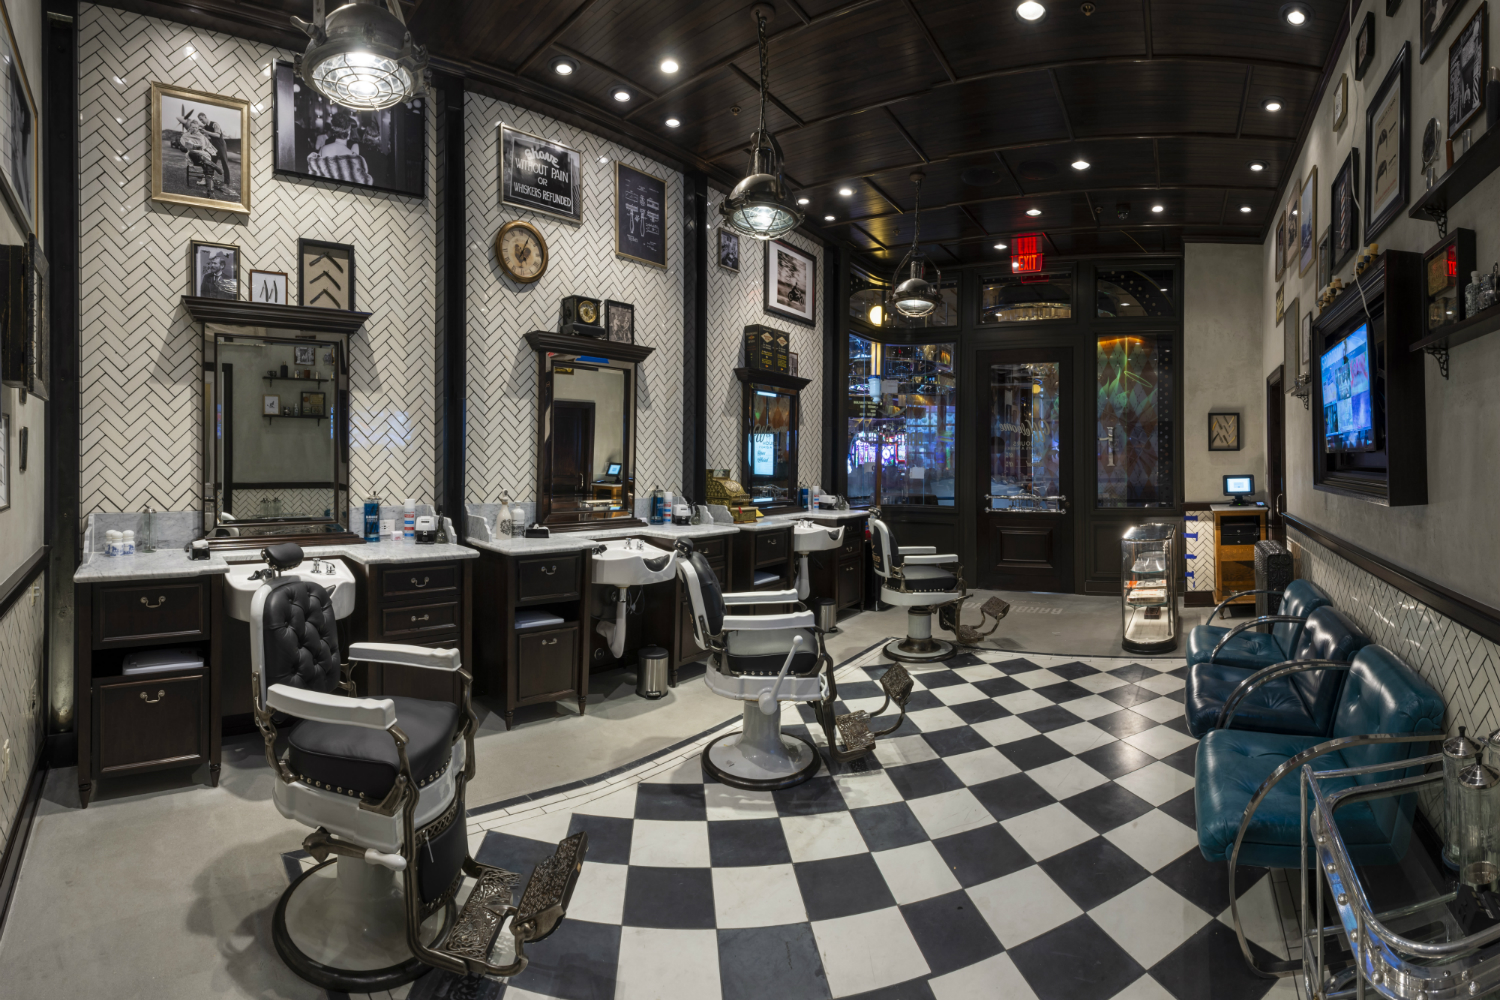 Drink and a haircut: The Barbershop combines cool experiences at the  Cosmopolitan - Las Vegas Weekly